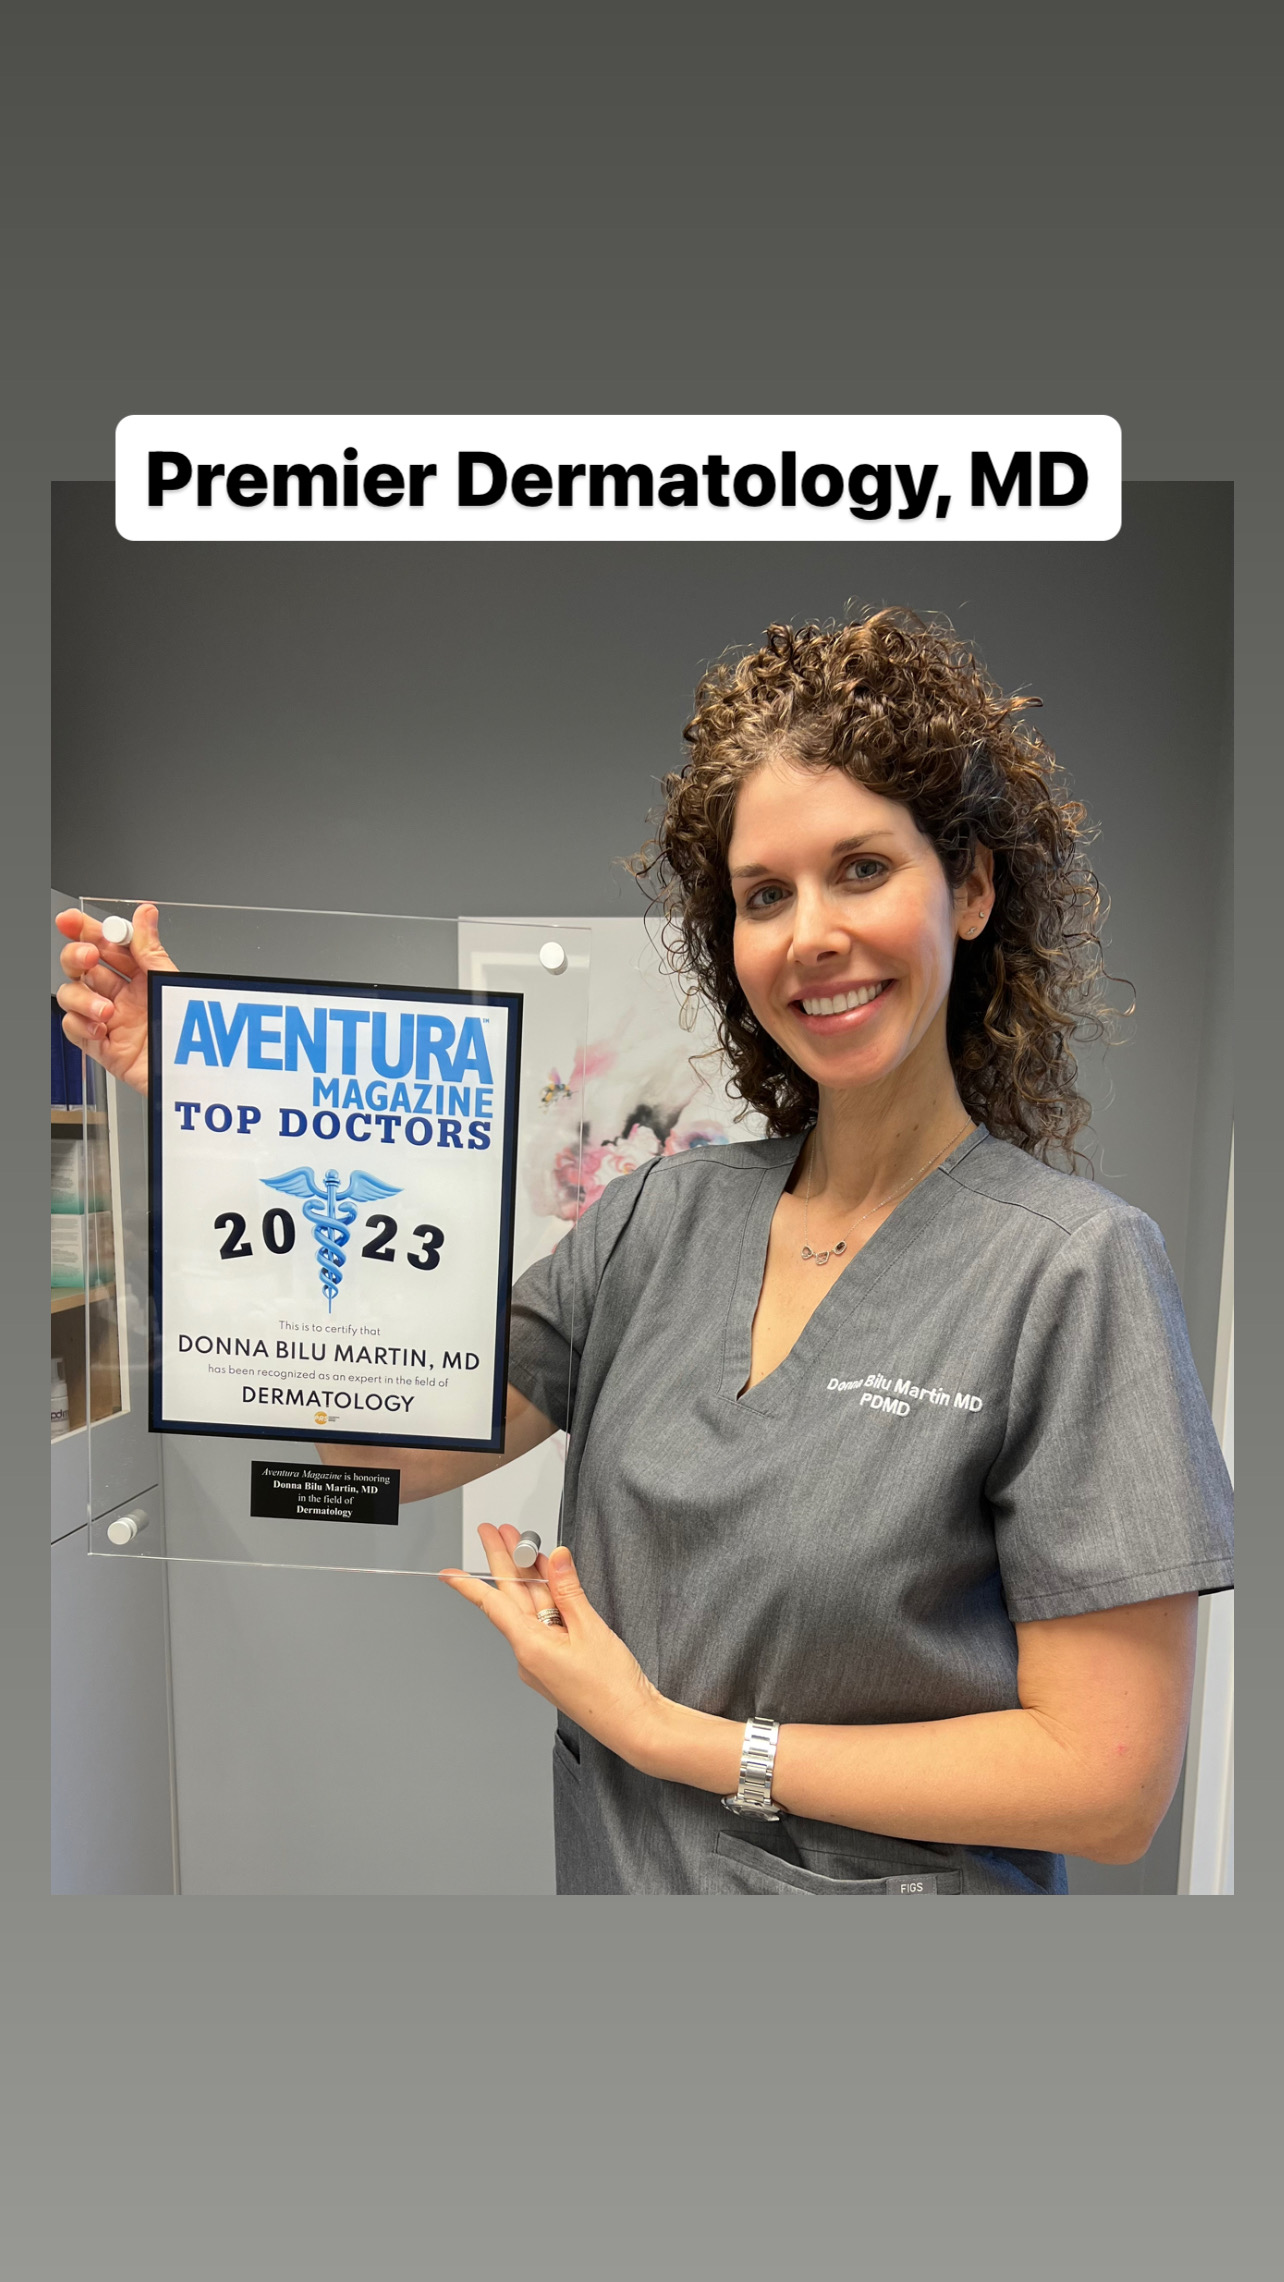 Dr. Bilu Martin is named a Top Doctor by Aventura Magazine